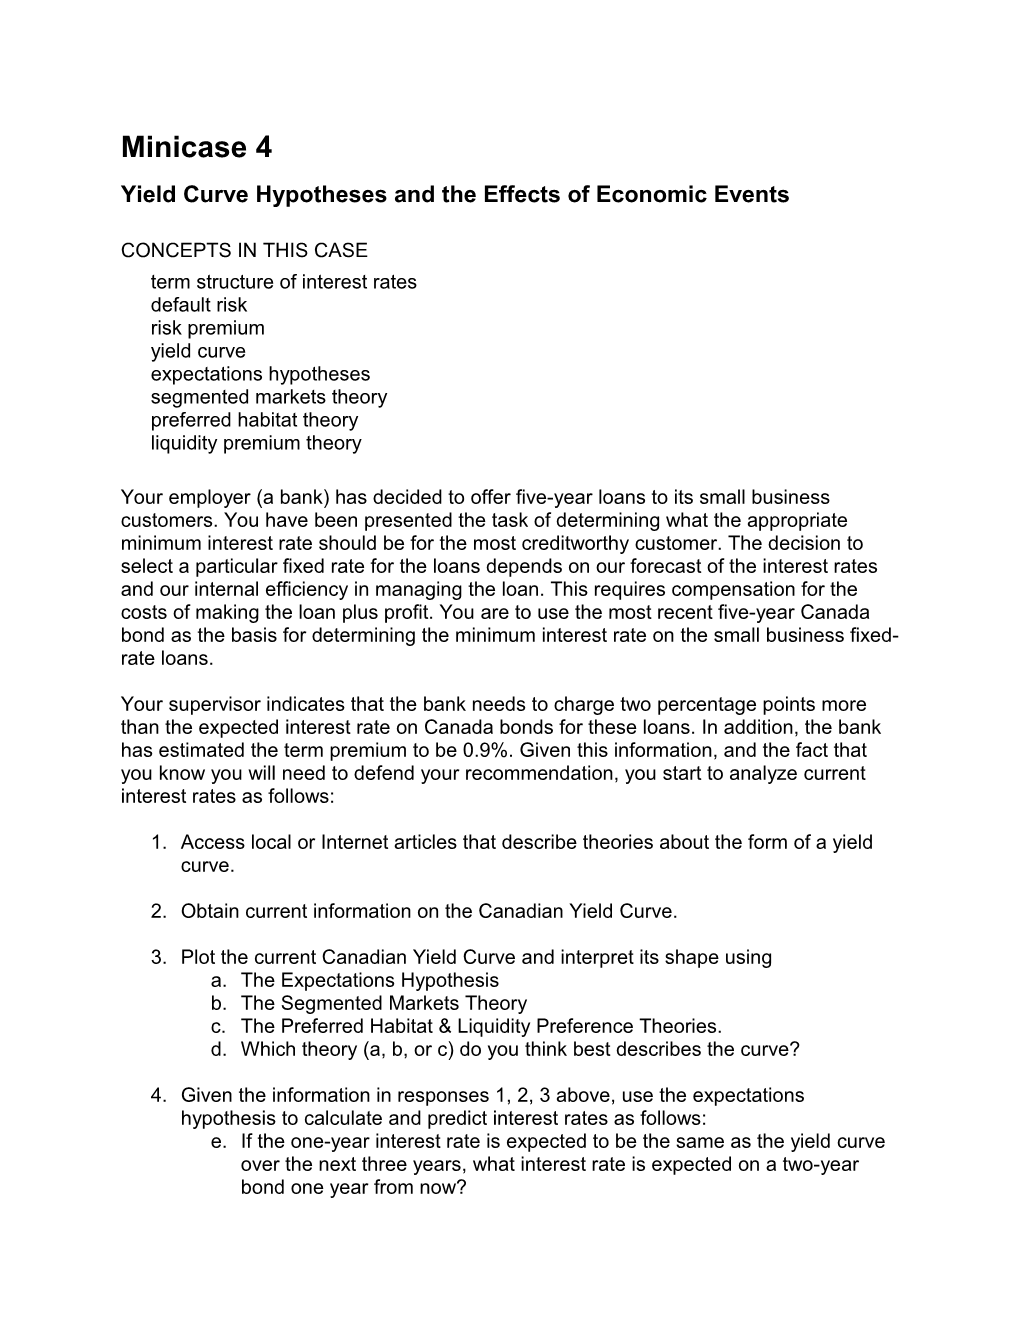 Yield Curve Hypotheses and the Effects of Economic Events